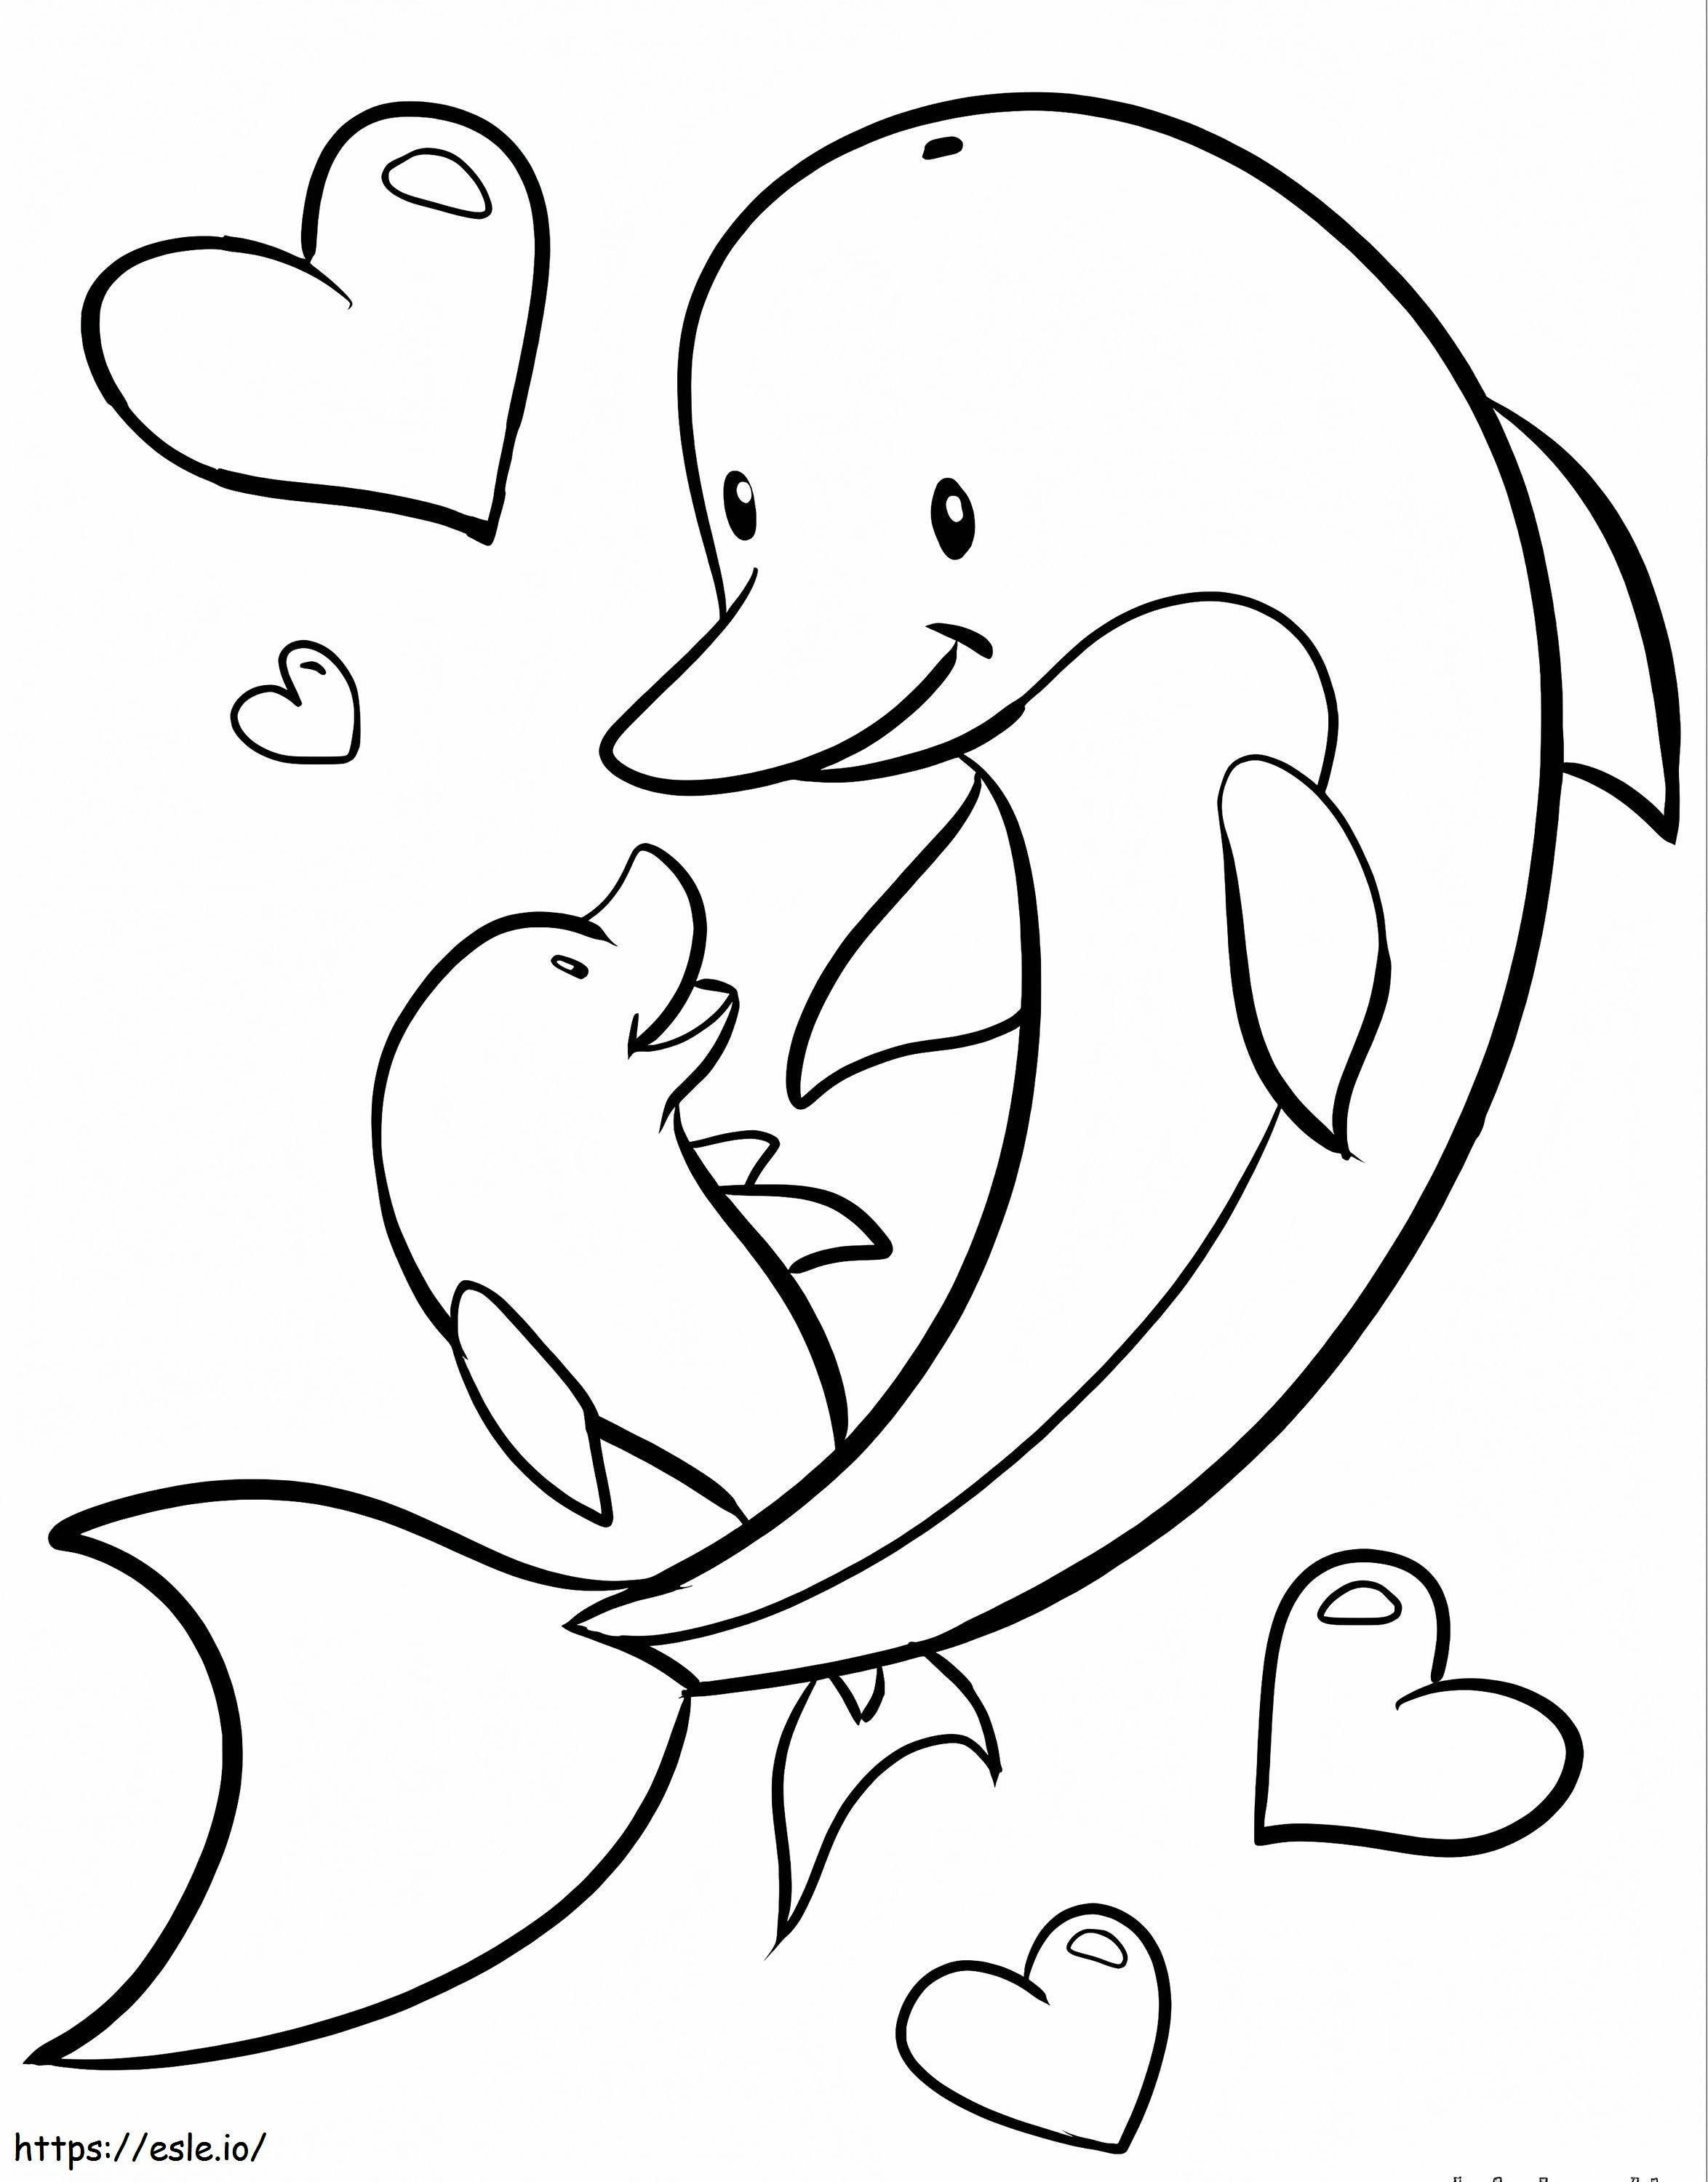 Dolphin Family coloring page